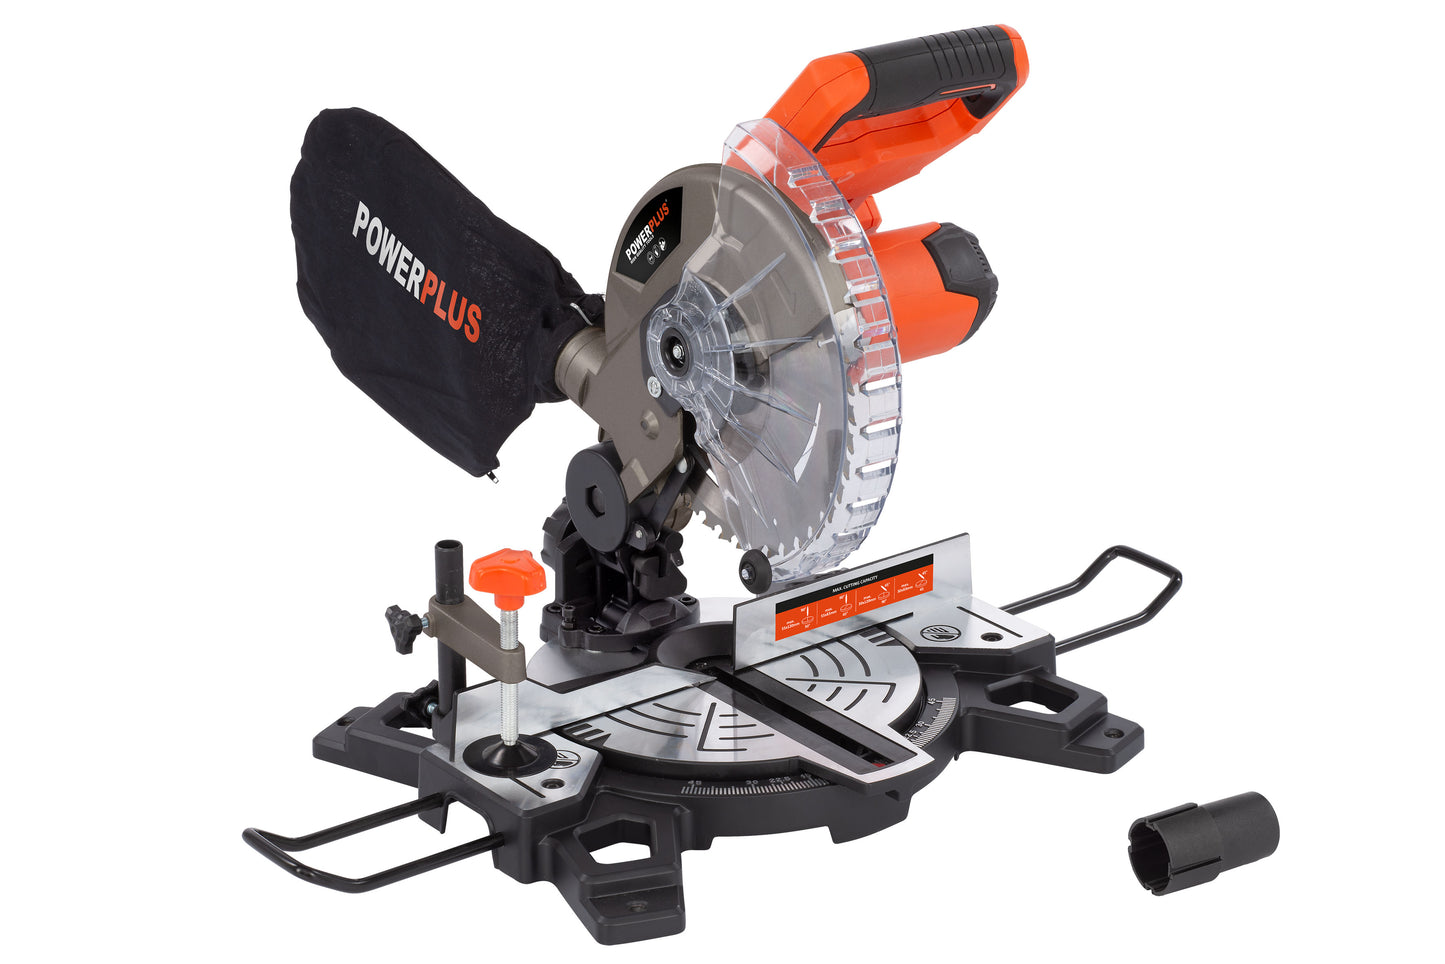 Dual Power - 20V Cordless Mitre Saw - 55mm (unit only)